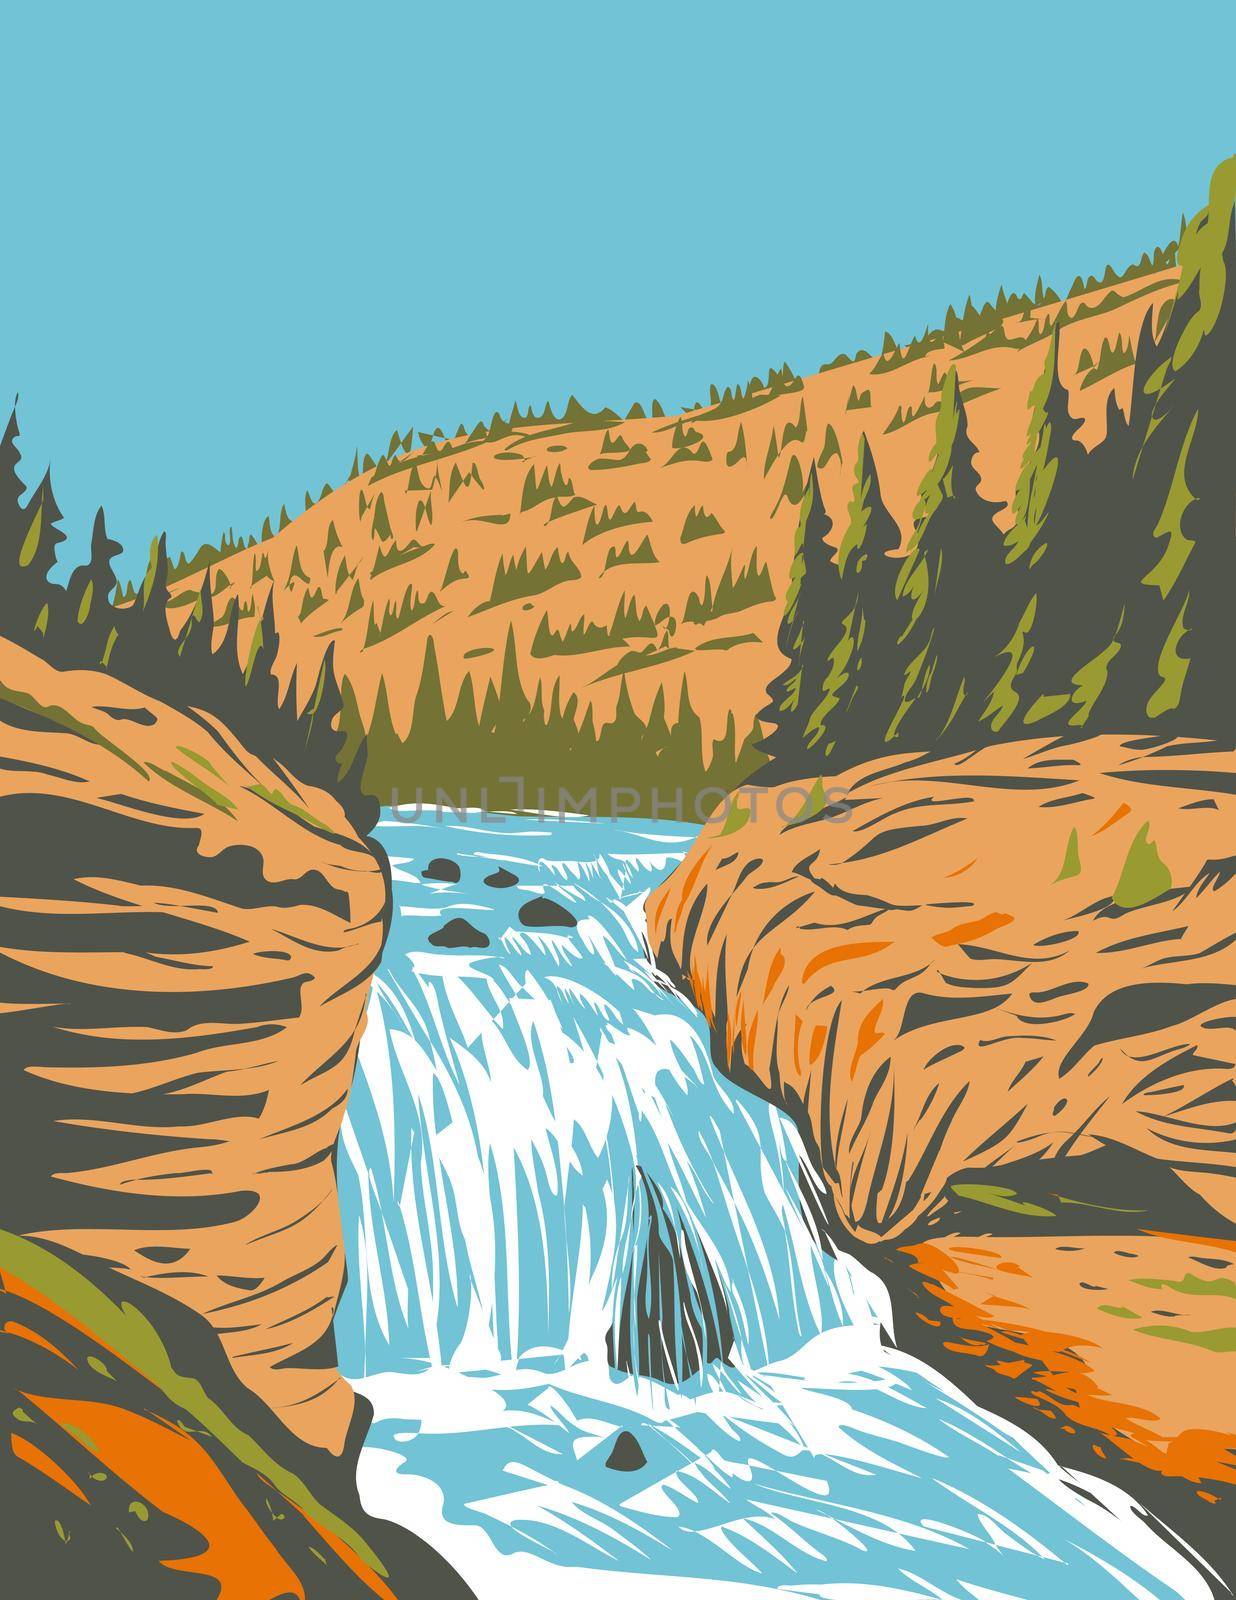 WPA poster art of Firehole Falls on the Firehole River located in southwestern Yellowstone National Park, Wyoming United States done in works project administration style or federal art project style.